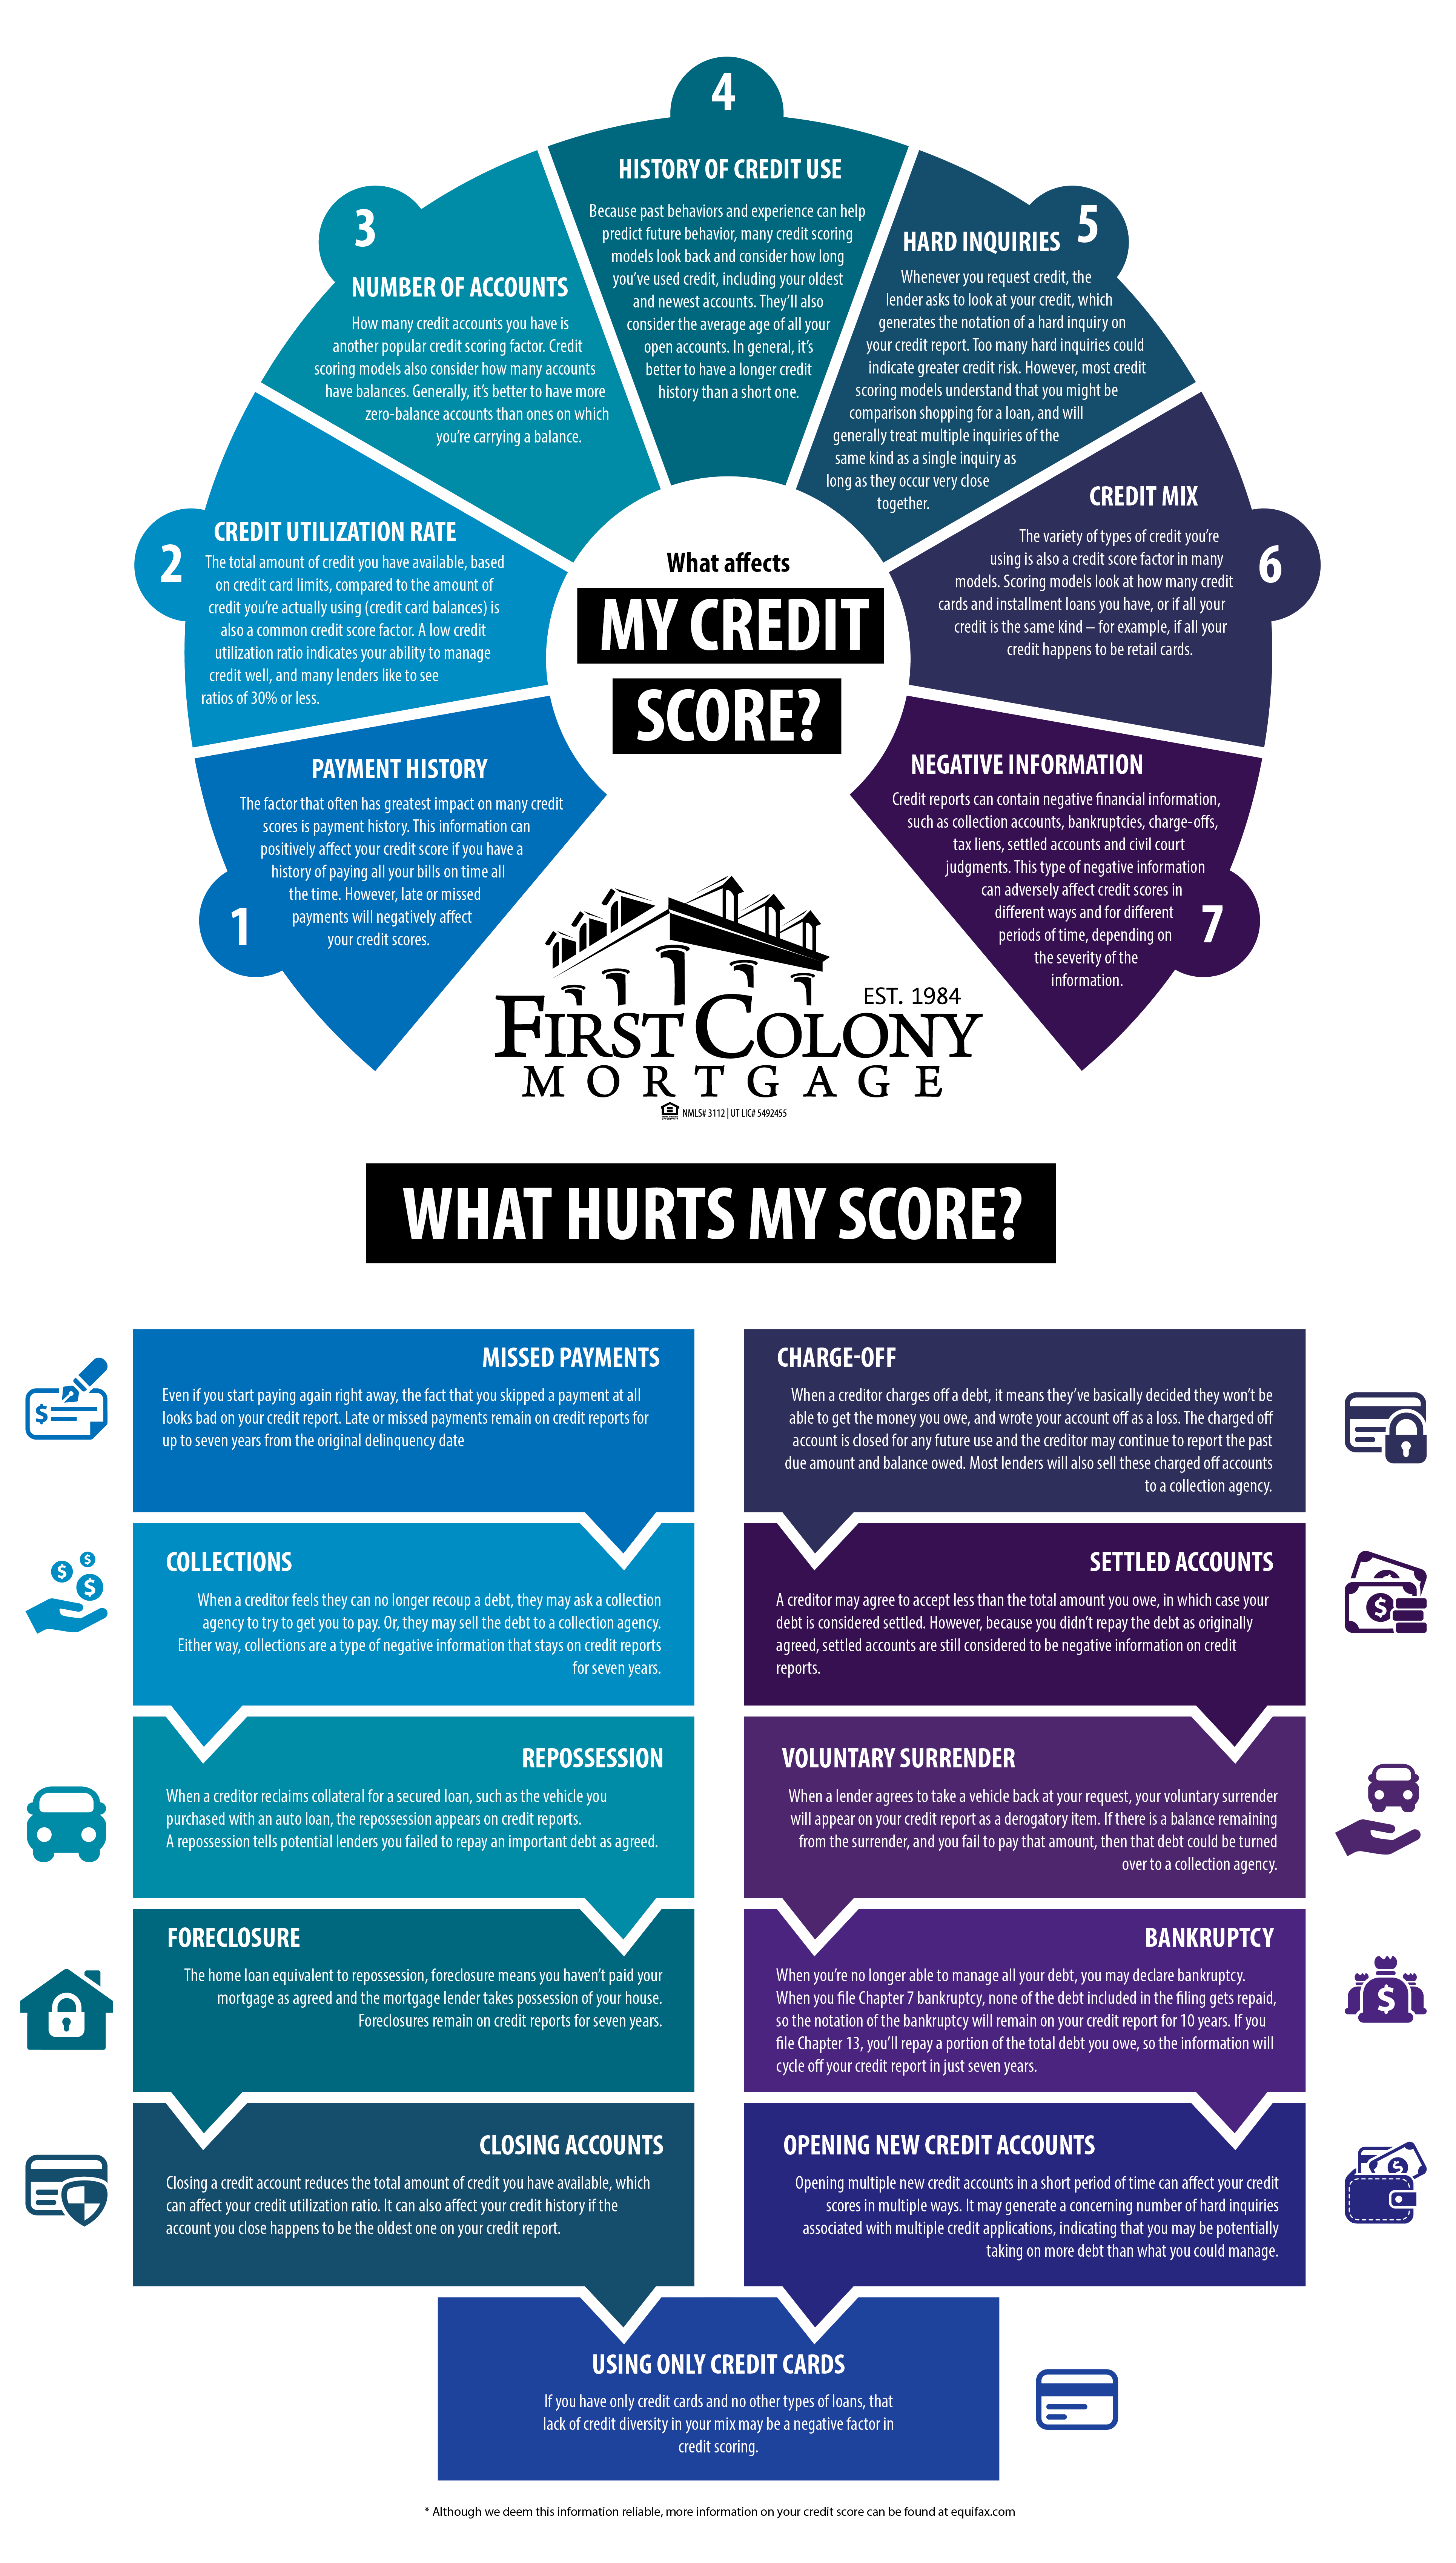 Common Things That Improve or Lower Credit Scores